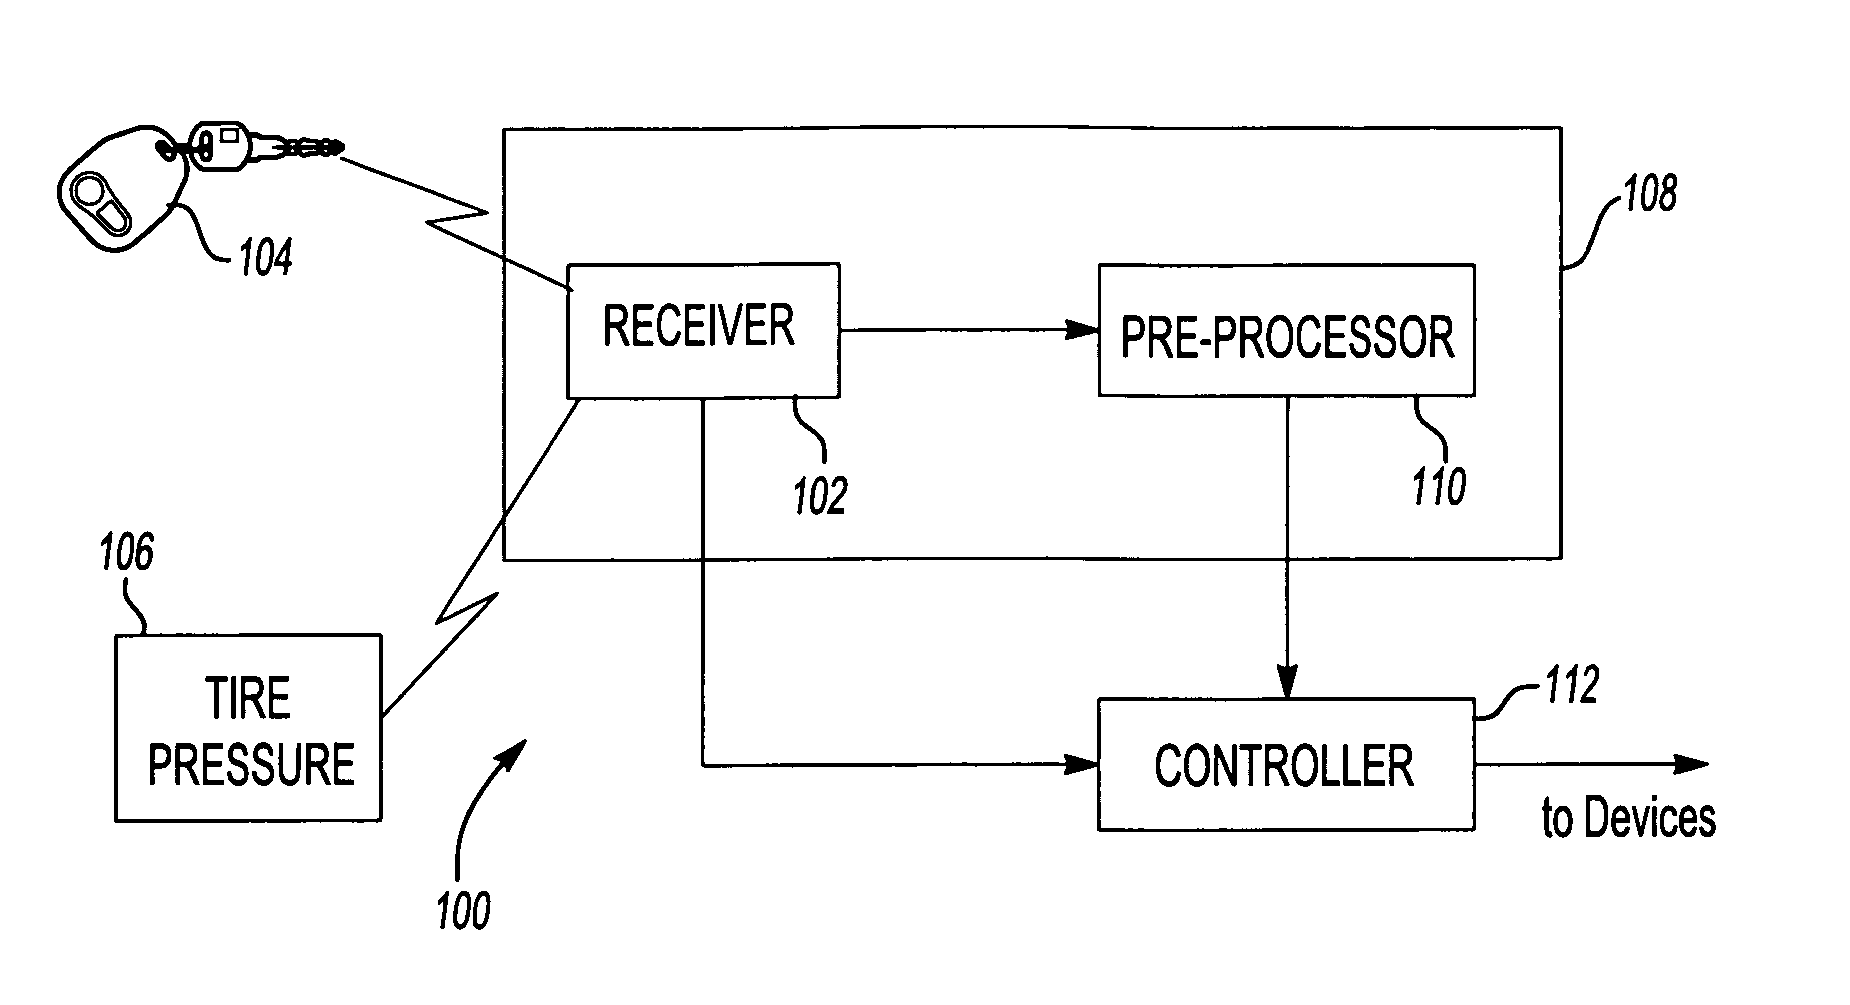 Tire pressure monitoring and remote keyless entry system using asynchronous duty cycling